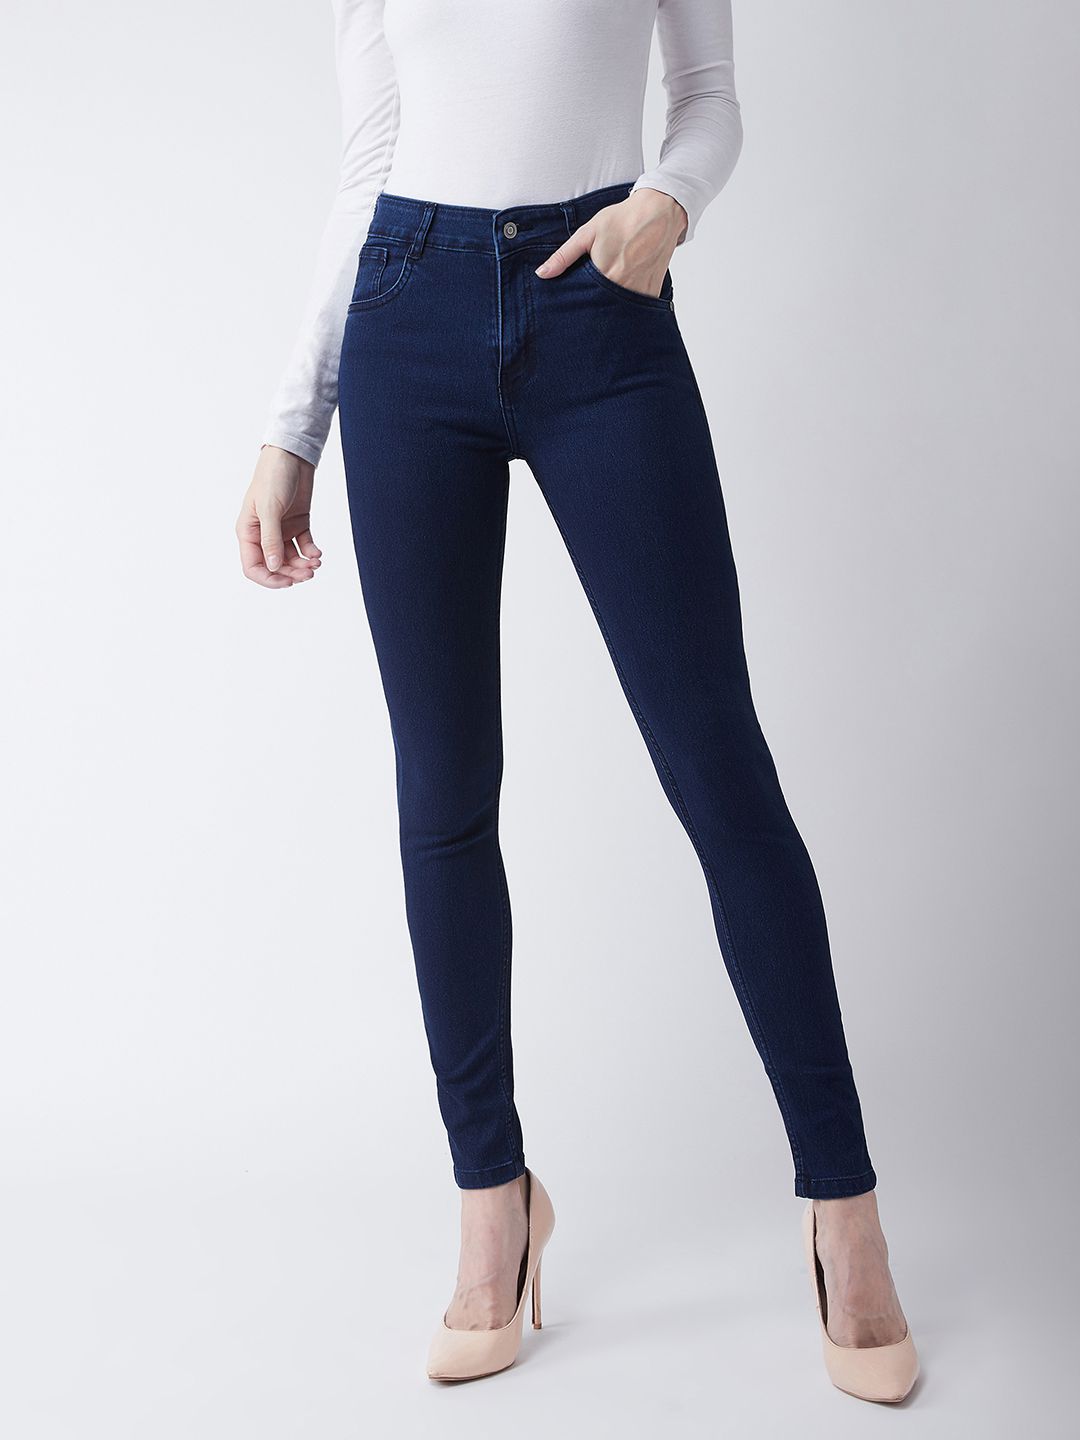     			Miss Chase - Navy Blue Denim Skinny Fit Women's Jeans ( Pack of 1 )